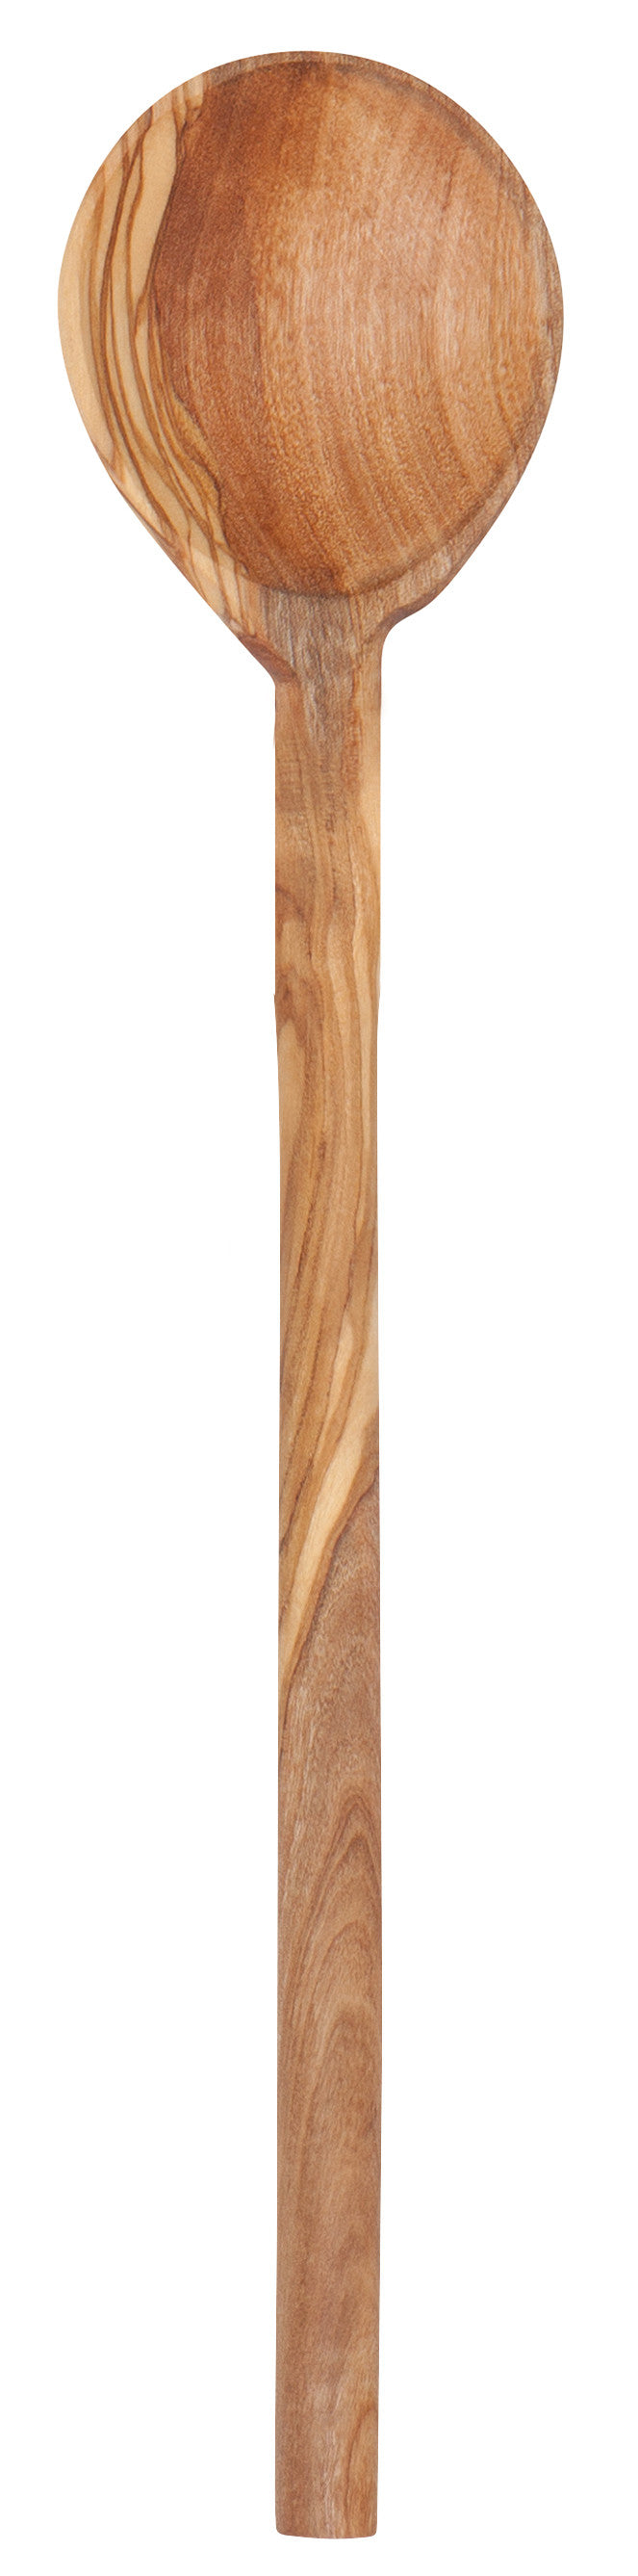 Long Olive Wood Spoon